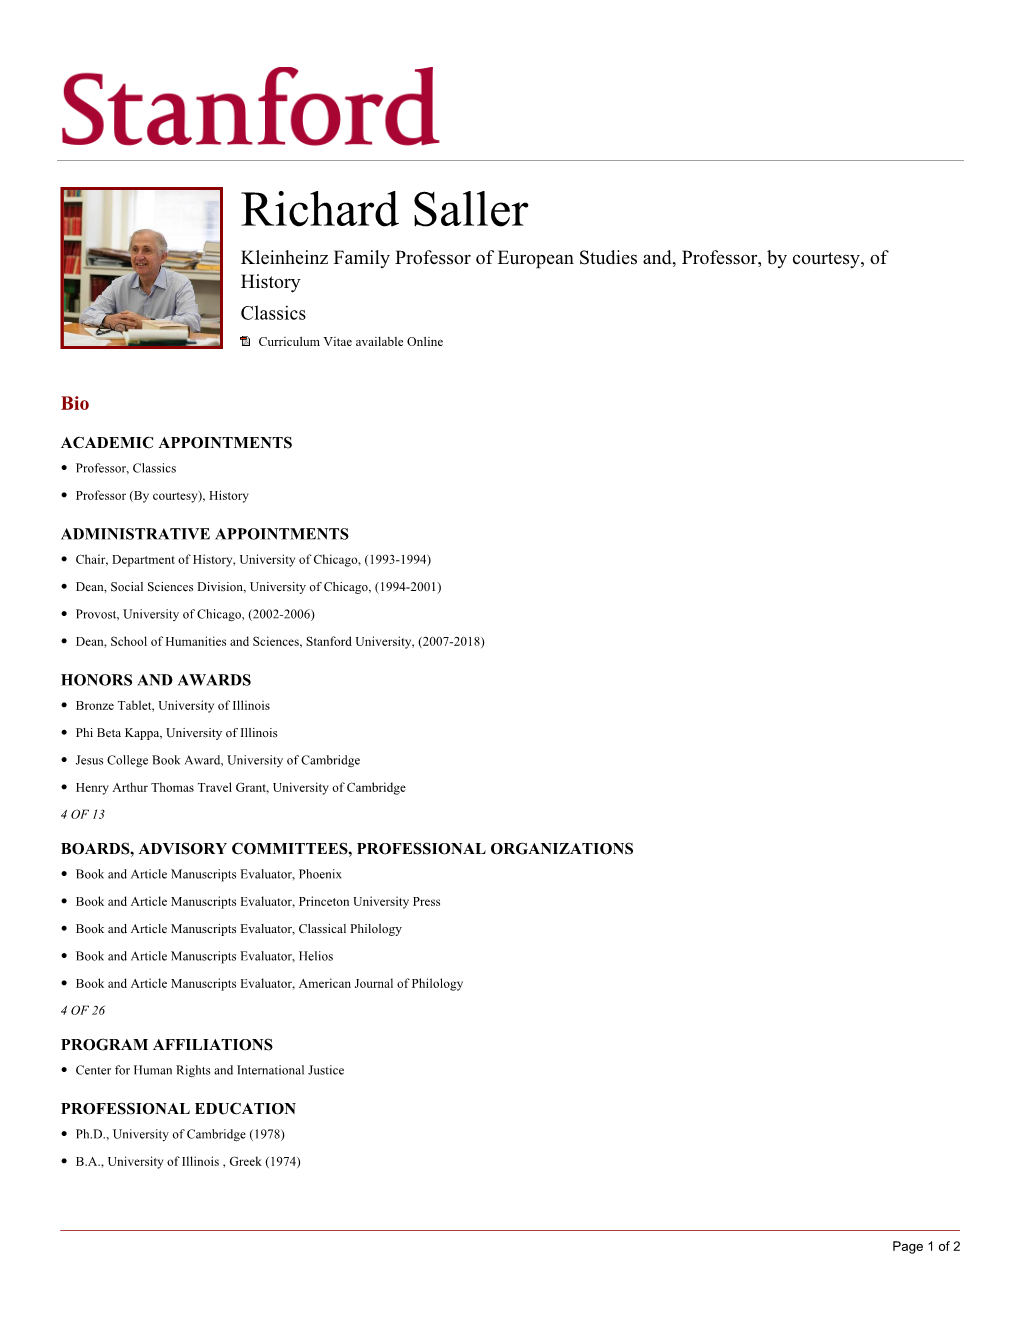 Richard Saller Kleinheinz Family Professor of European Studies And, Professor, by Courtesy, of History Classics Curriculum Vitae Available Online